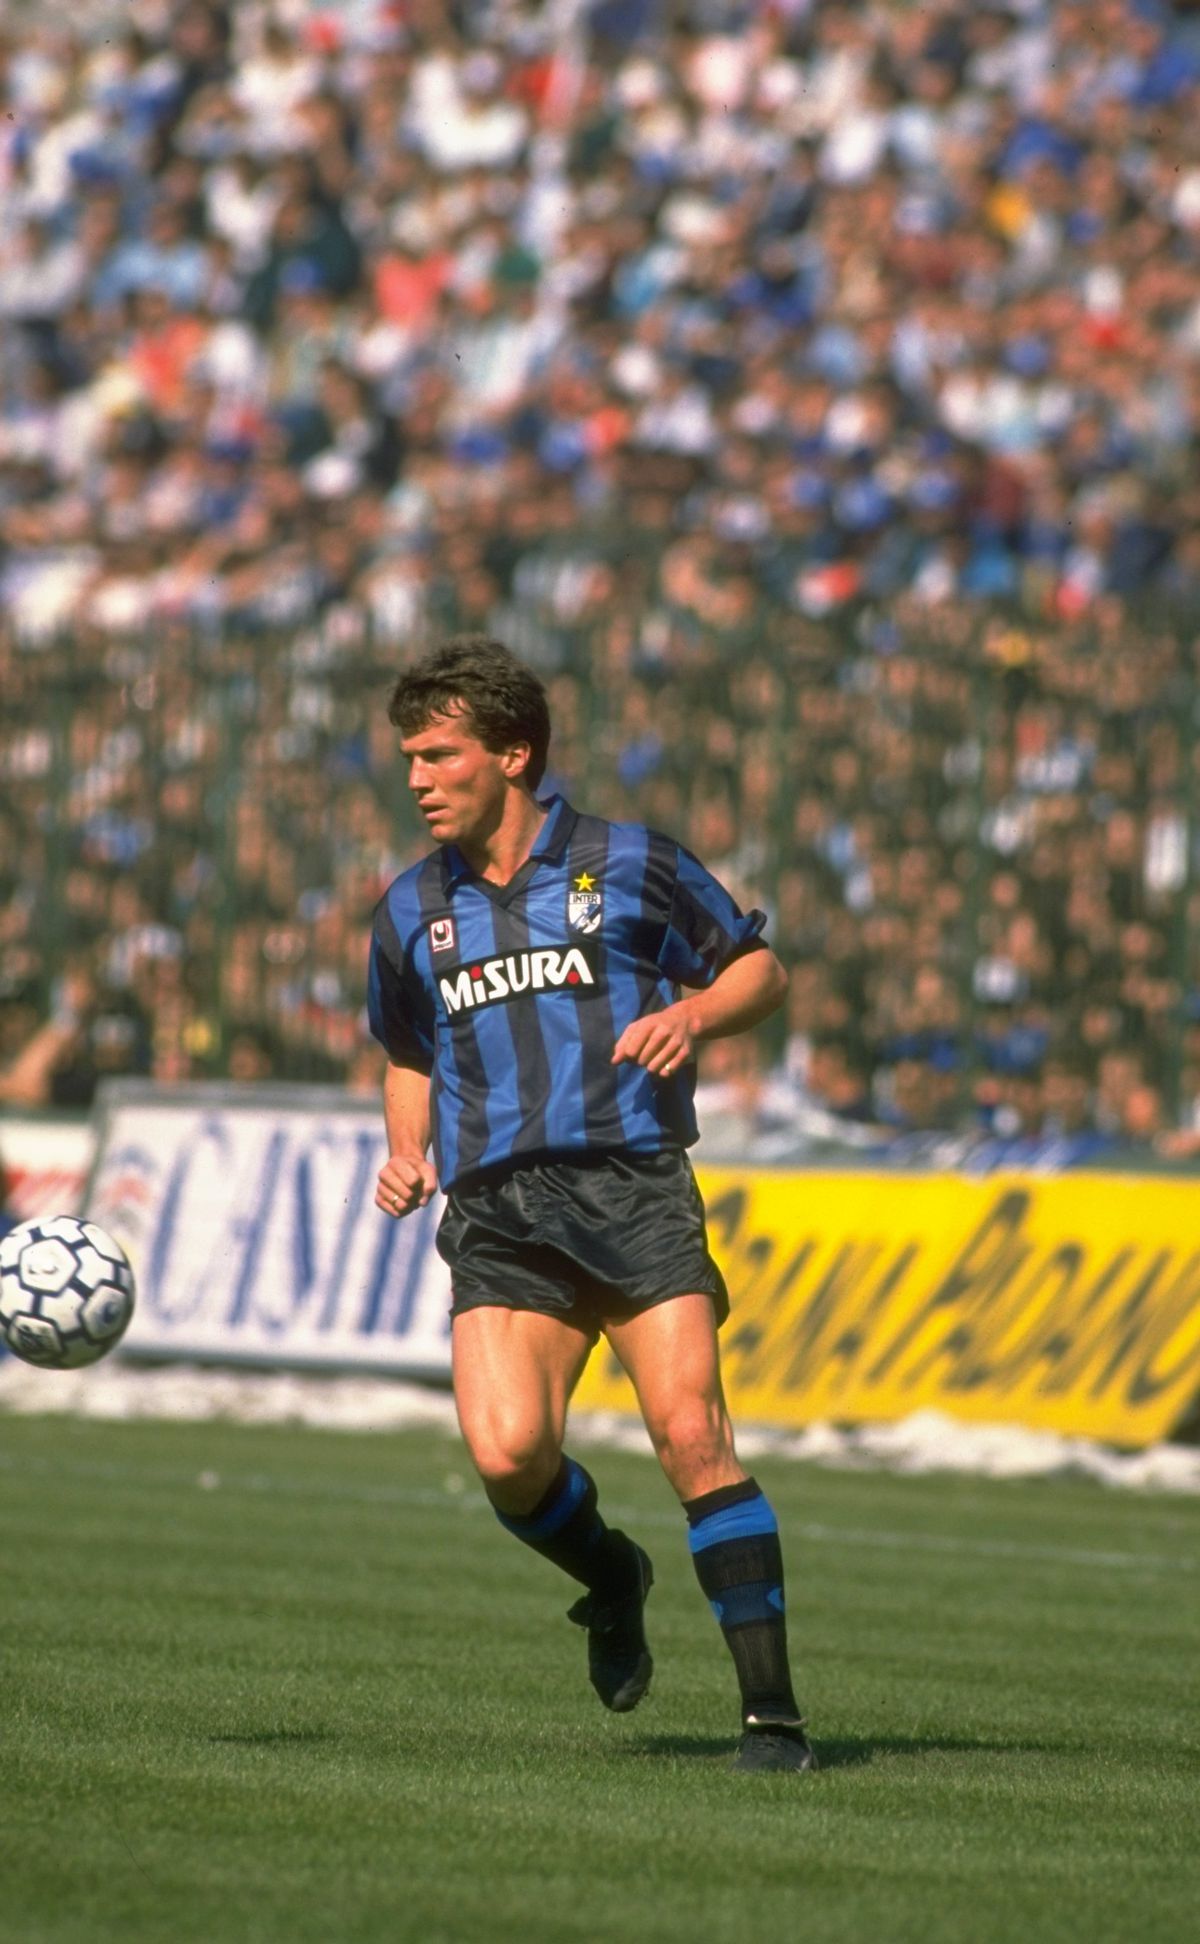 Matthäus: “Inter, beating Napoli would be the turning point of your season” of Madonnina